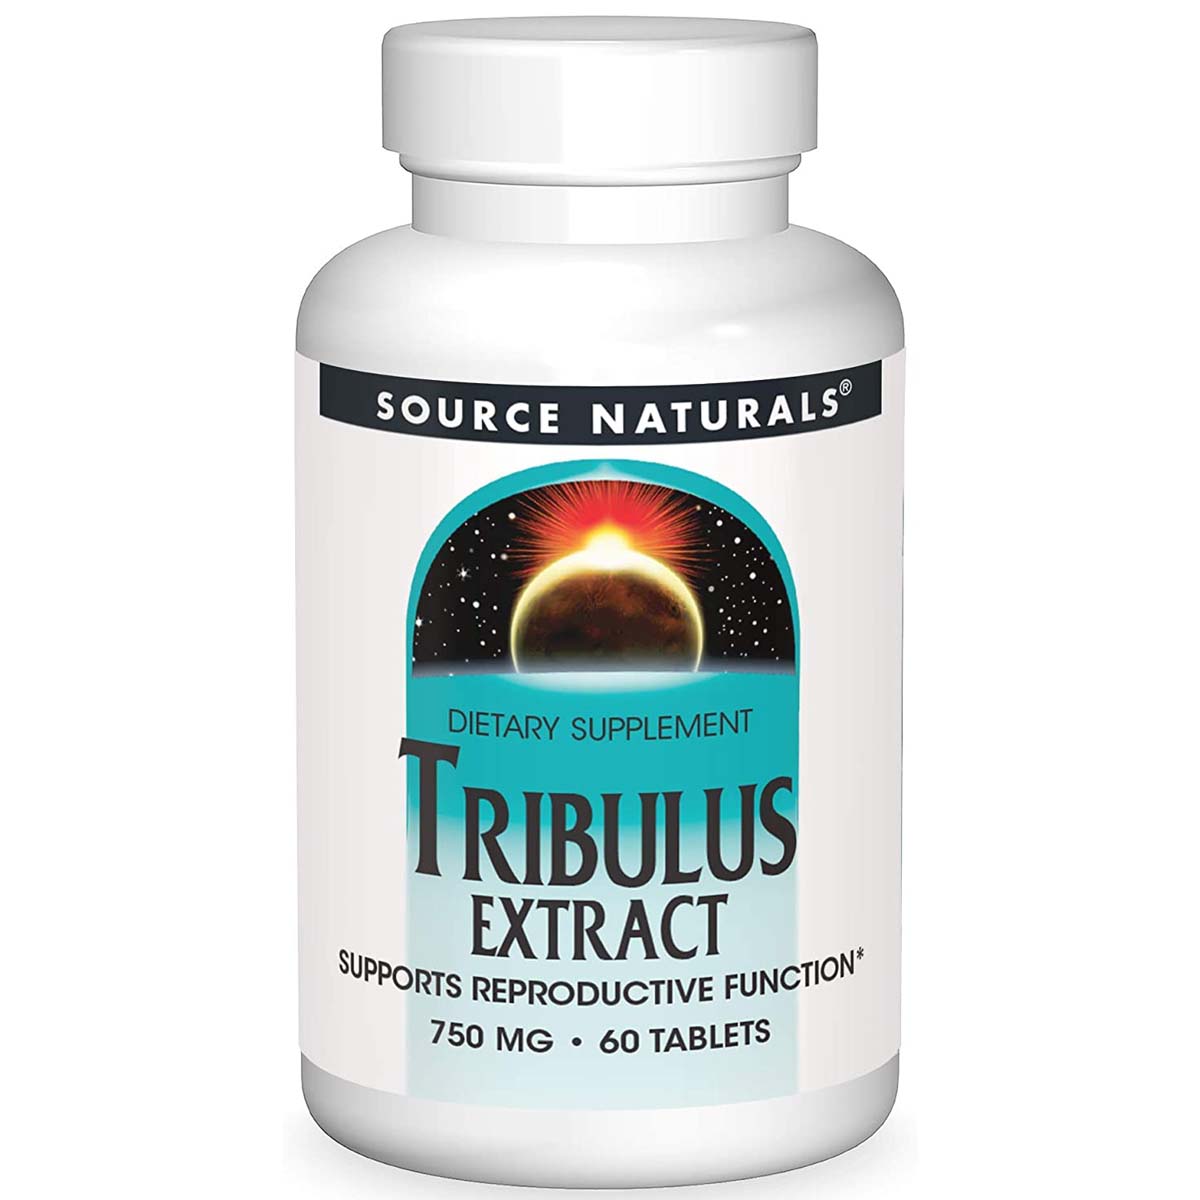 Source Naturals Tribulus Extract, 750 mg, 30 Tablets